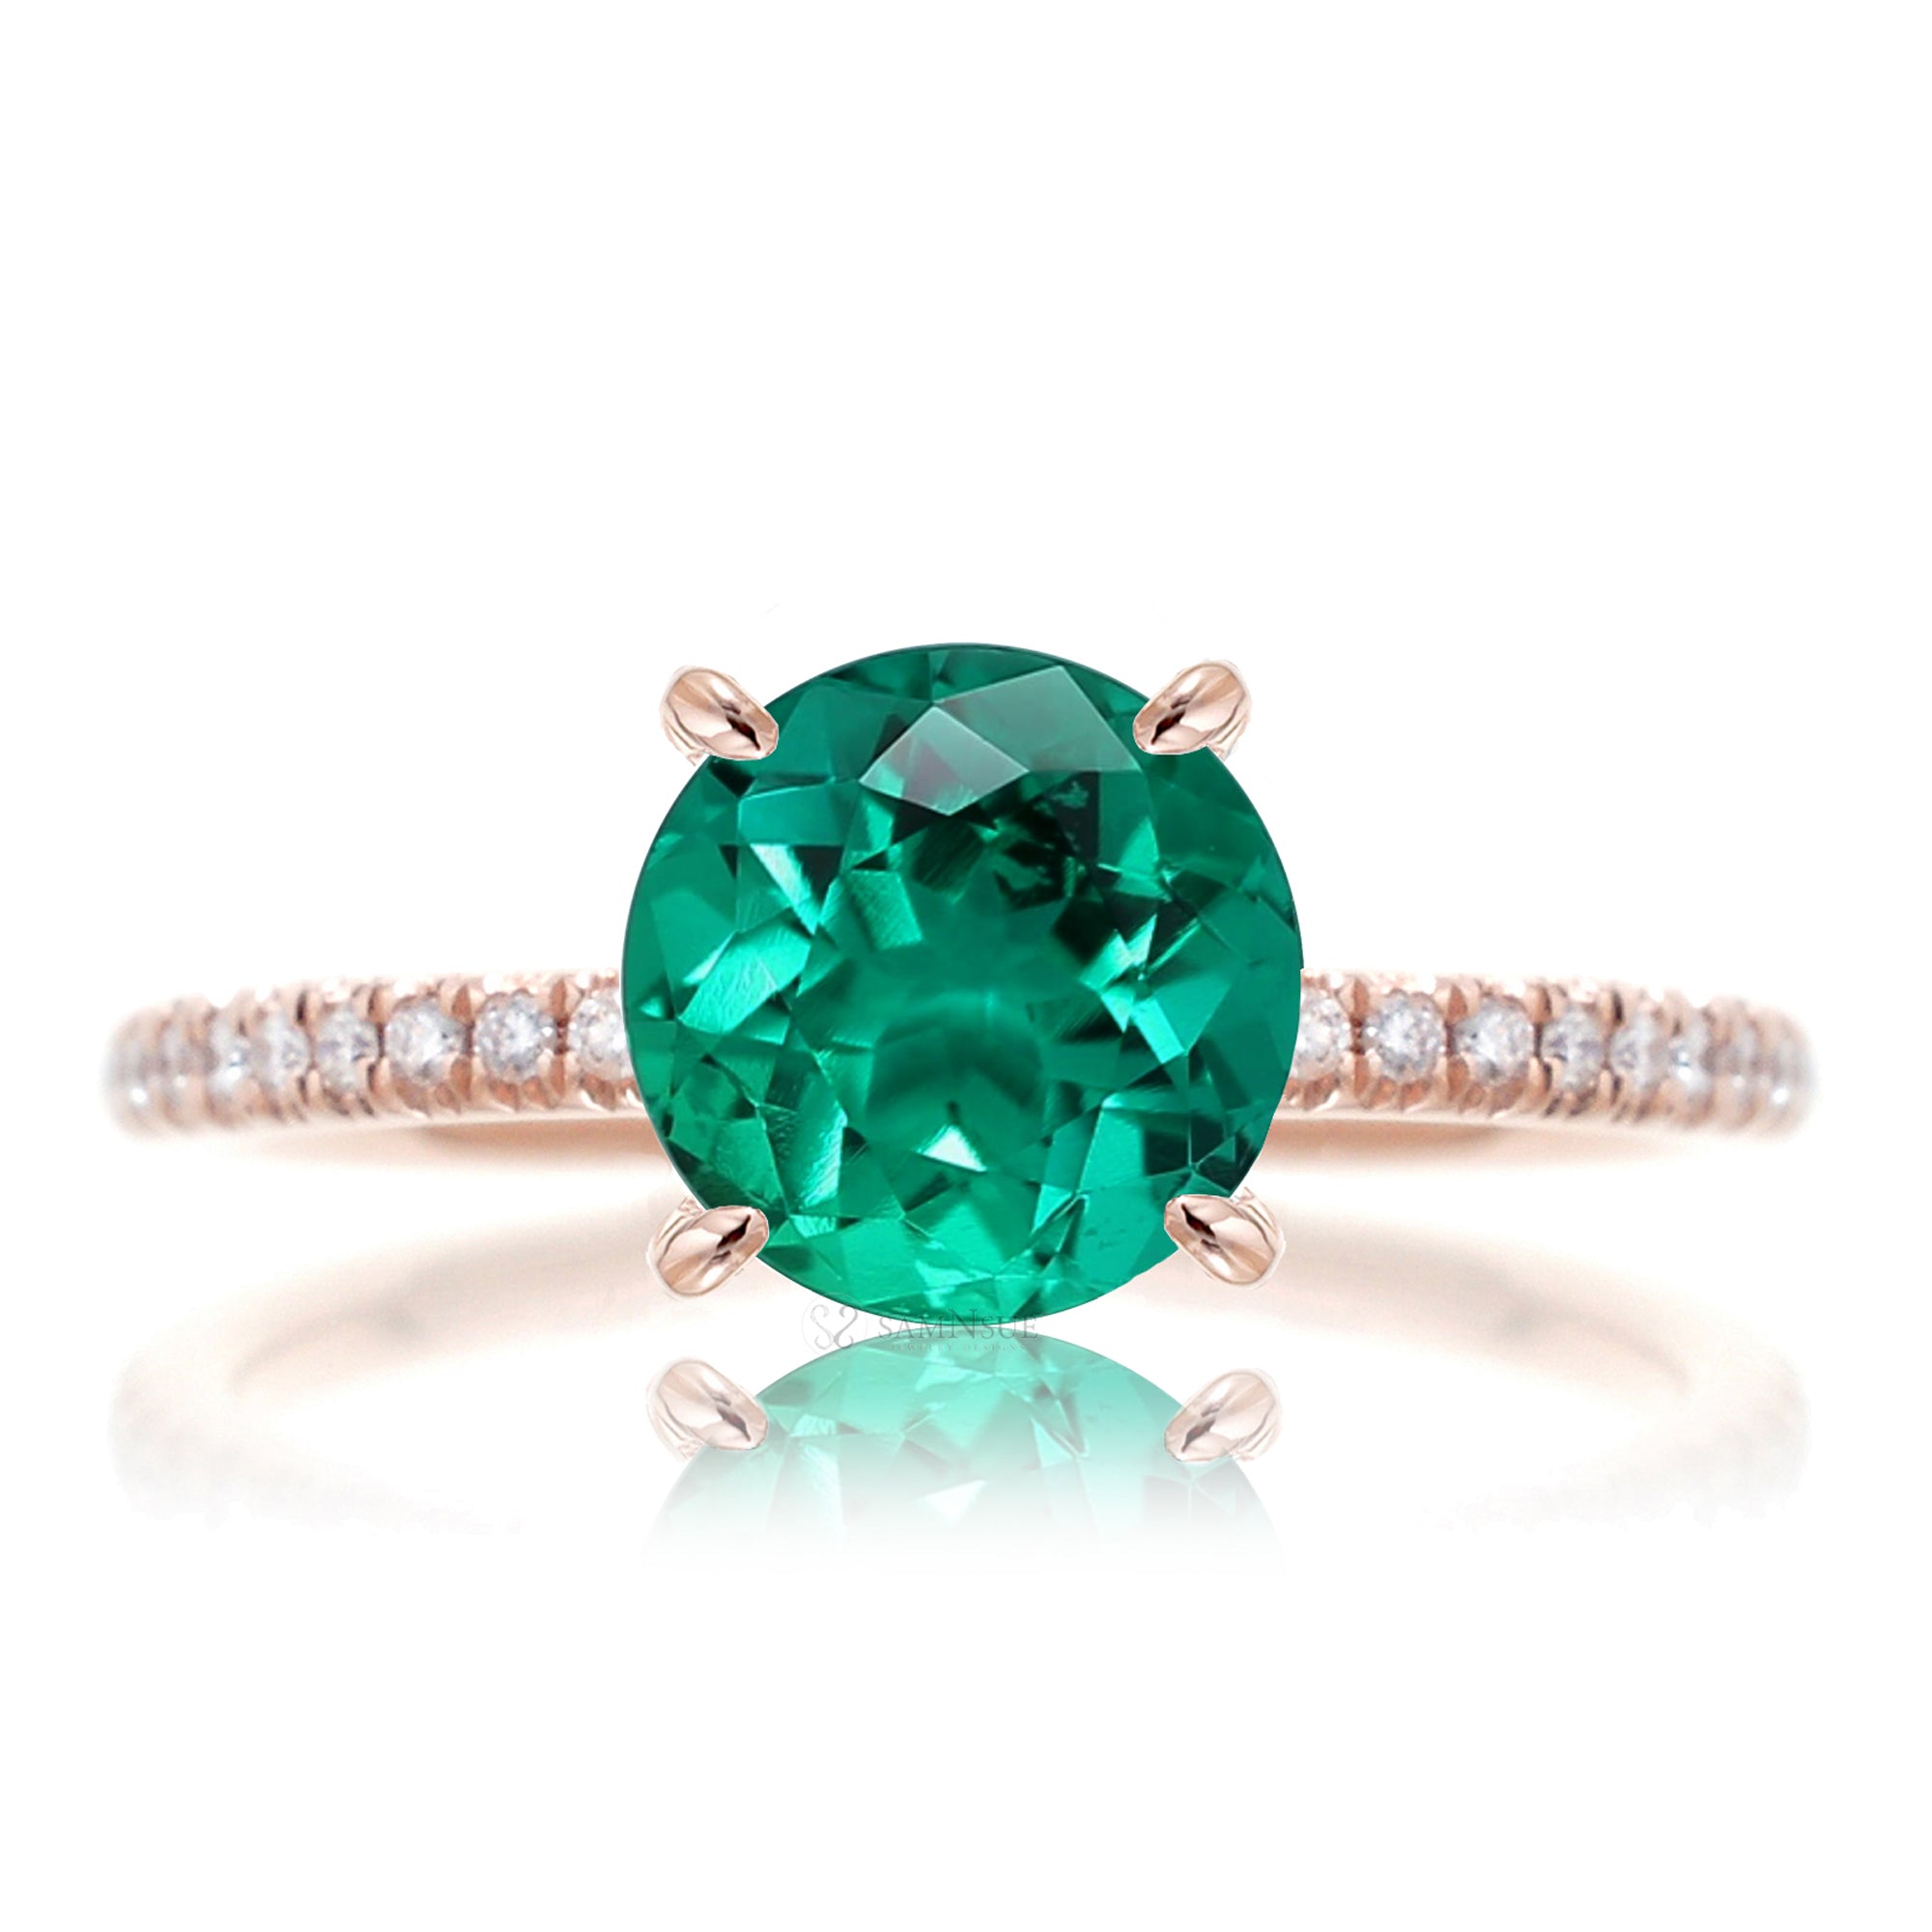 Round green emerald diamond band engagement ring rose gold - the Ava